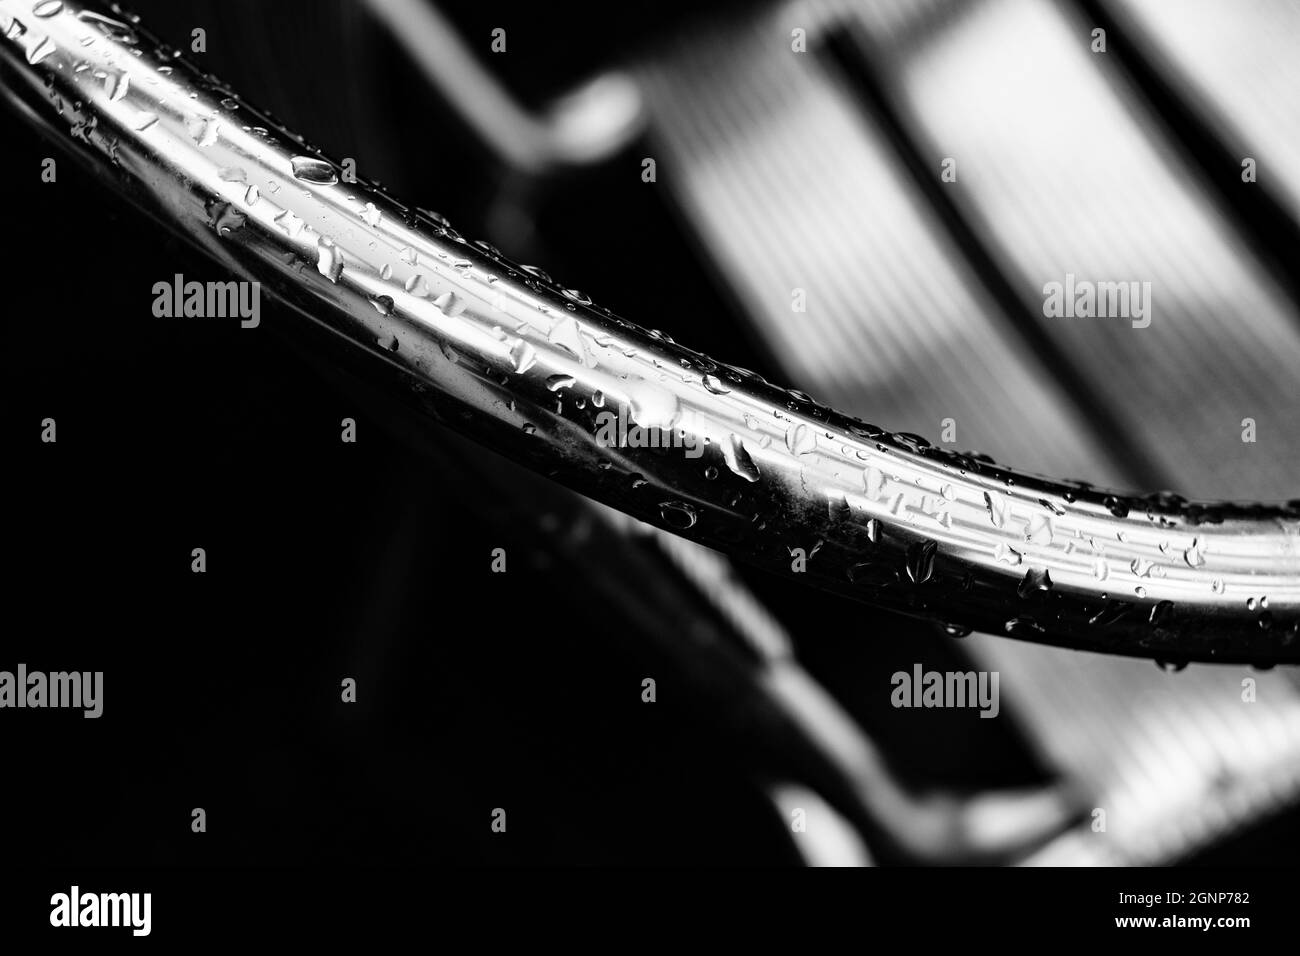 Droplets of rain on a metal chair Stock Photo